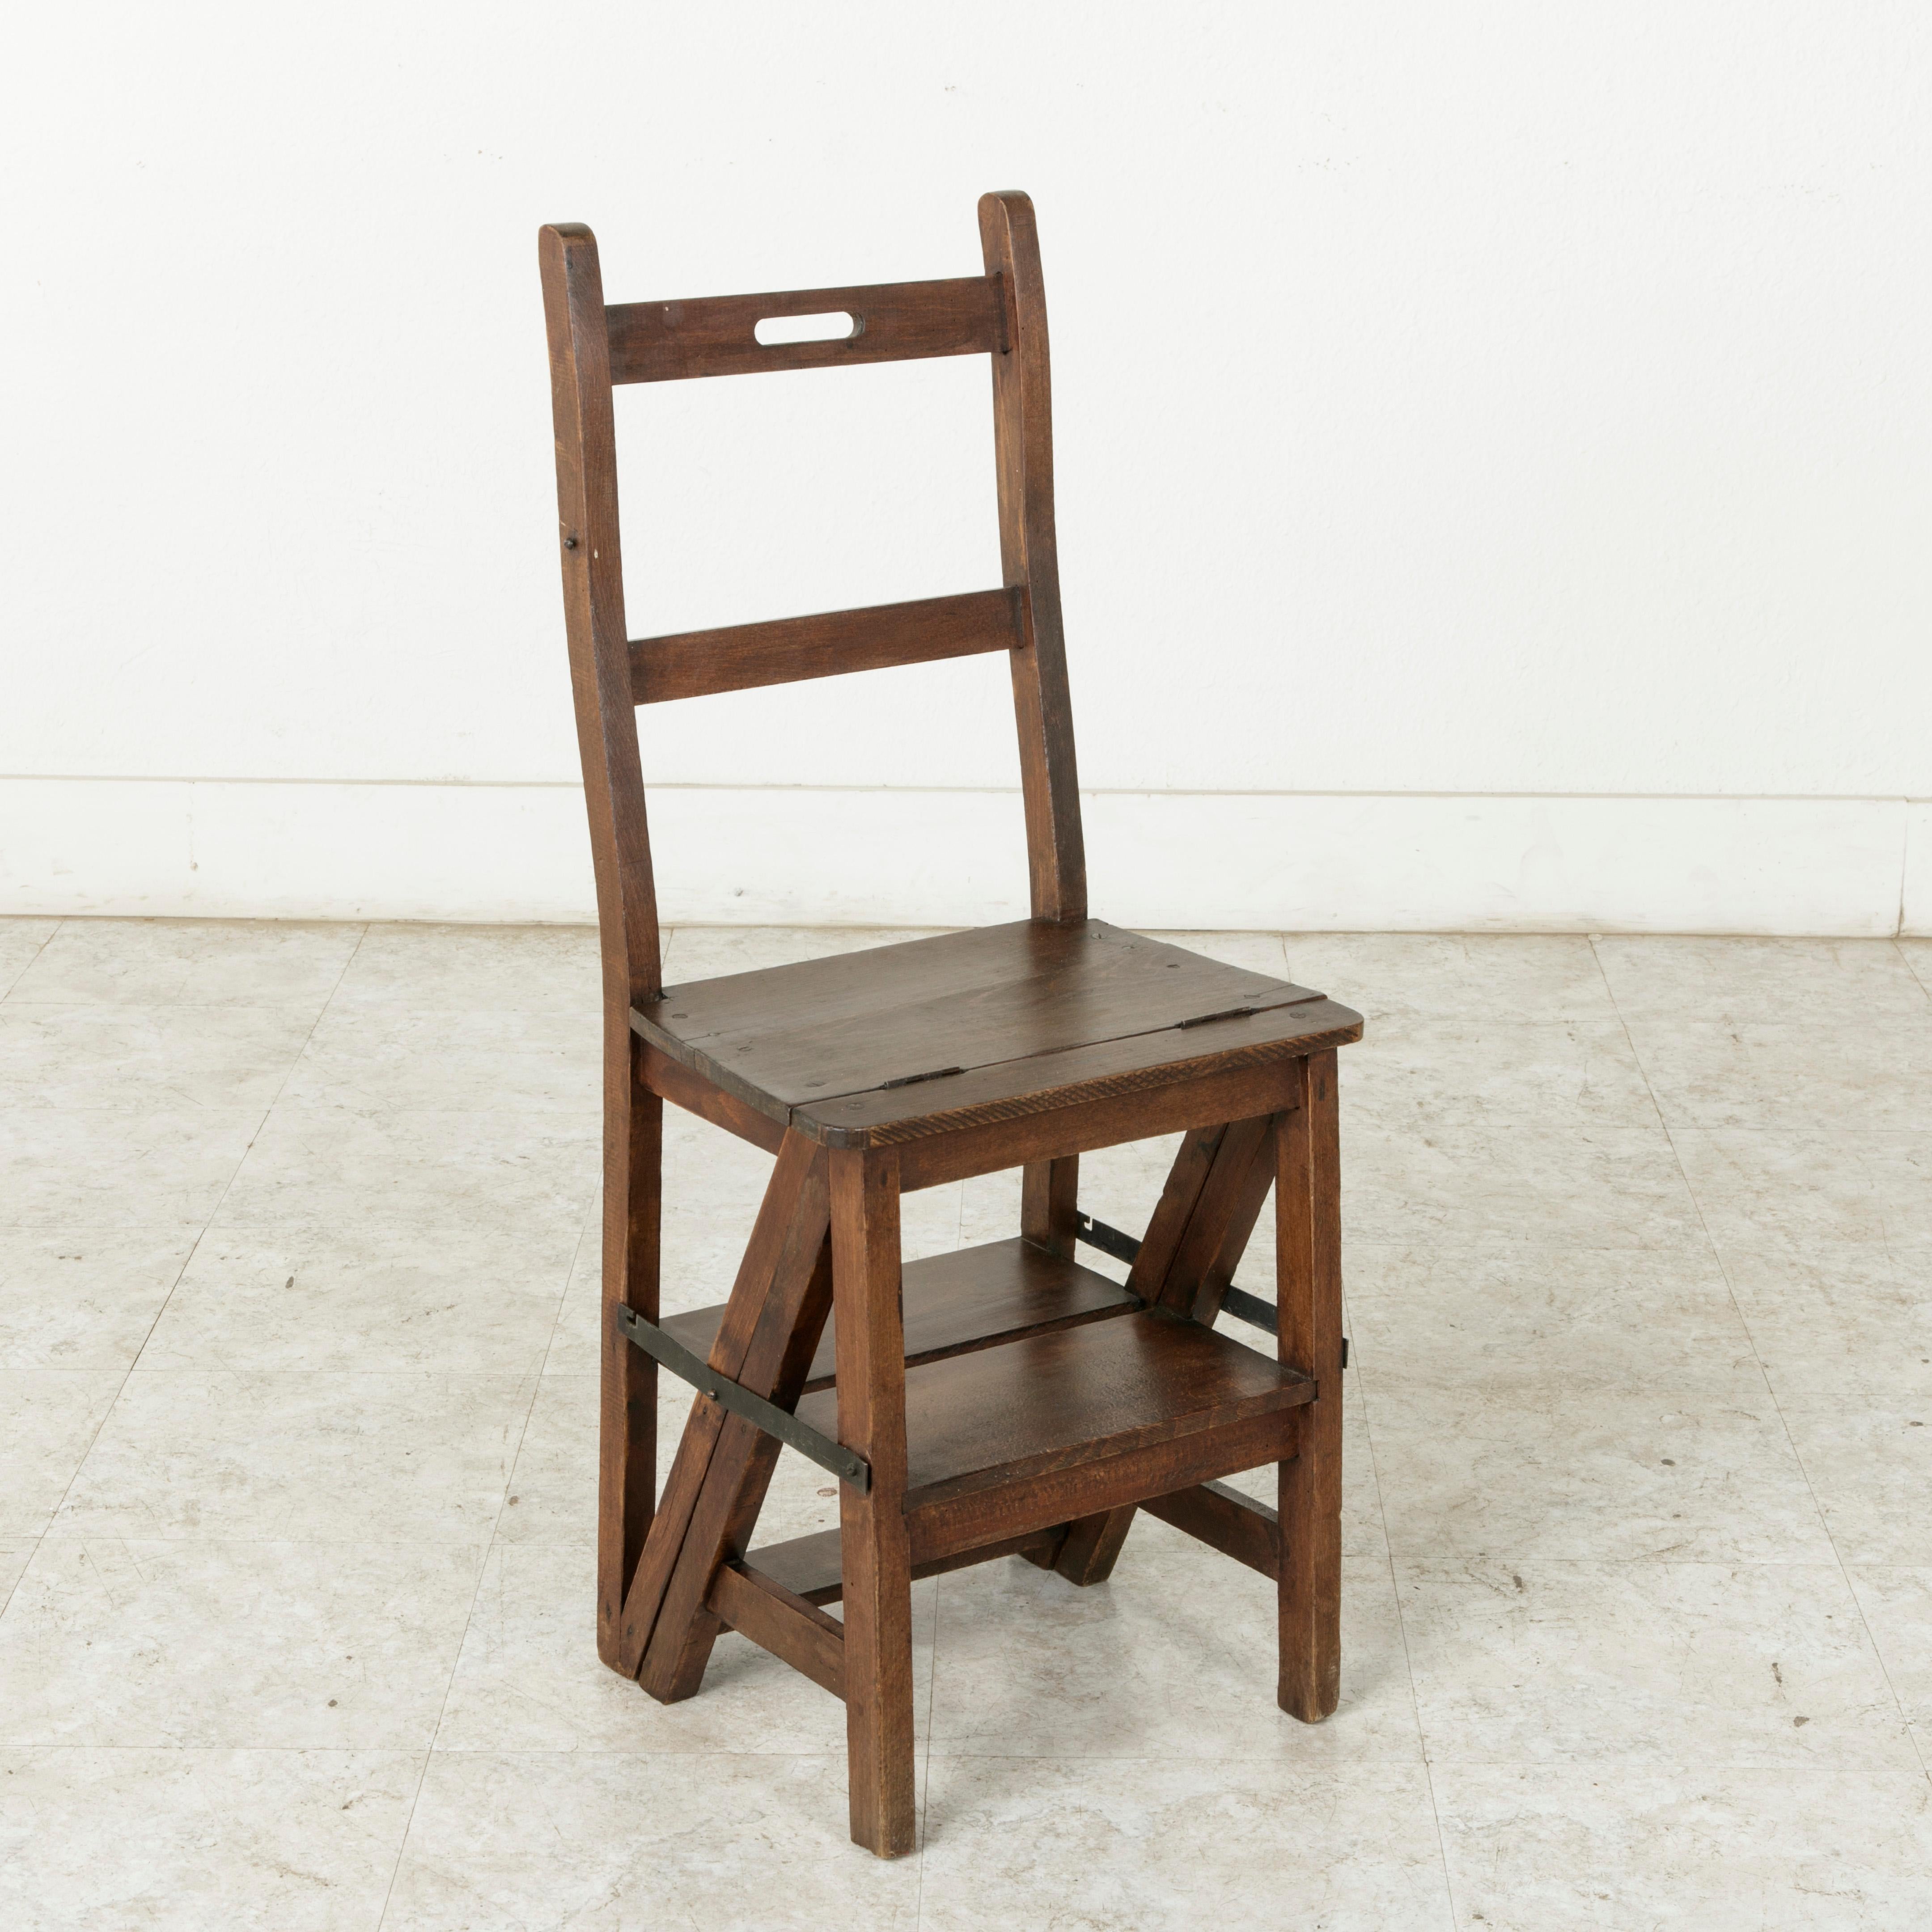 From the region of Provence in southern France, this artisan-made oak folding chair is hinged so that it can convert into a step ladder. Iron straps with hooks allow for the piece to be secured in place both as a chair or ladder. When used as a